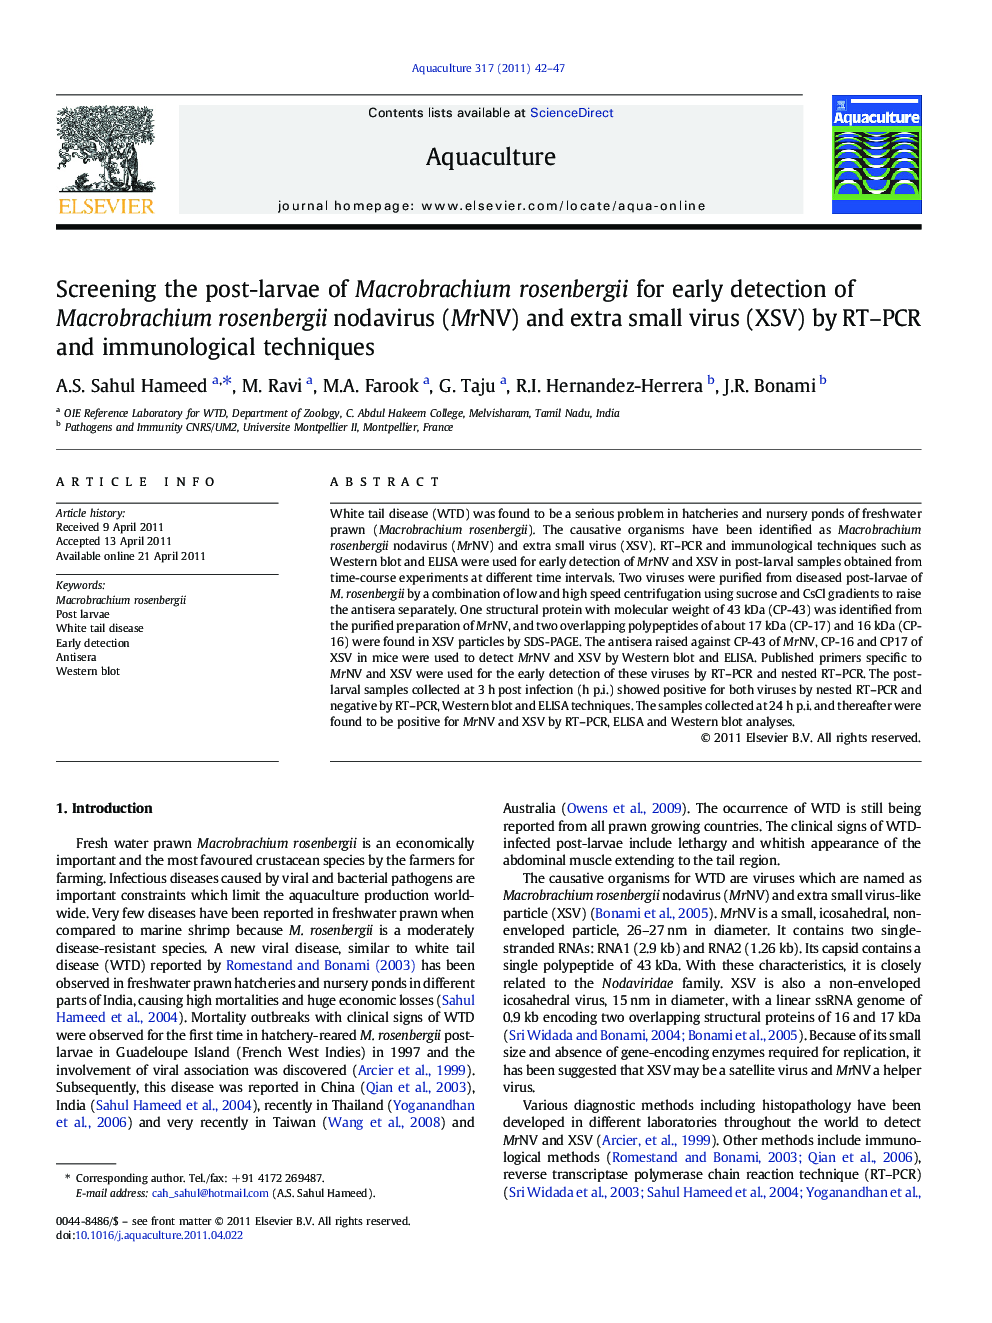 Screening the post-larvae of Macrobrachium rosenbergii for early detection of Macrobrachium rosenbergii nodavirus (MrNV) and extra small virus (XSV) by RT–PCR and immunological techniques